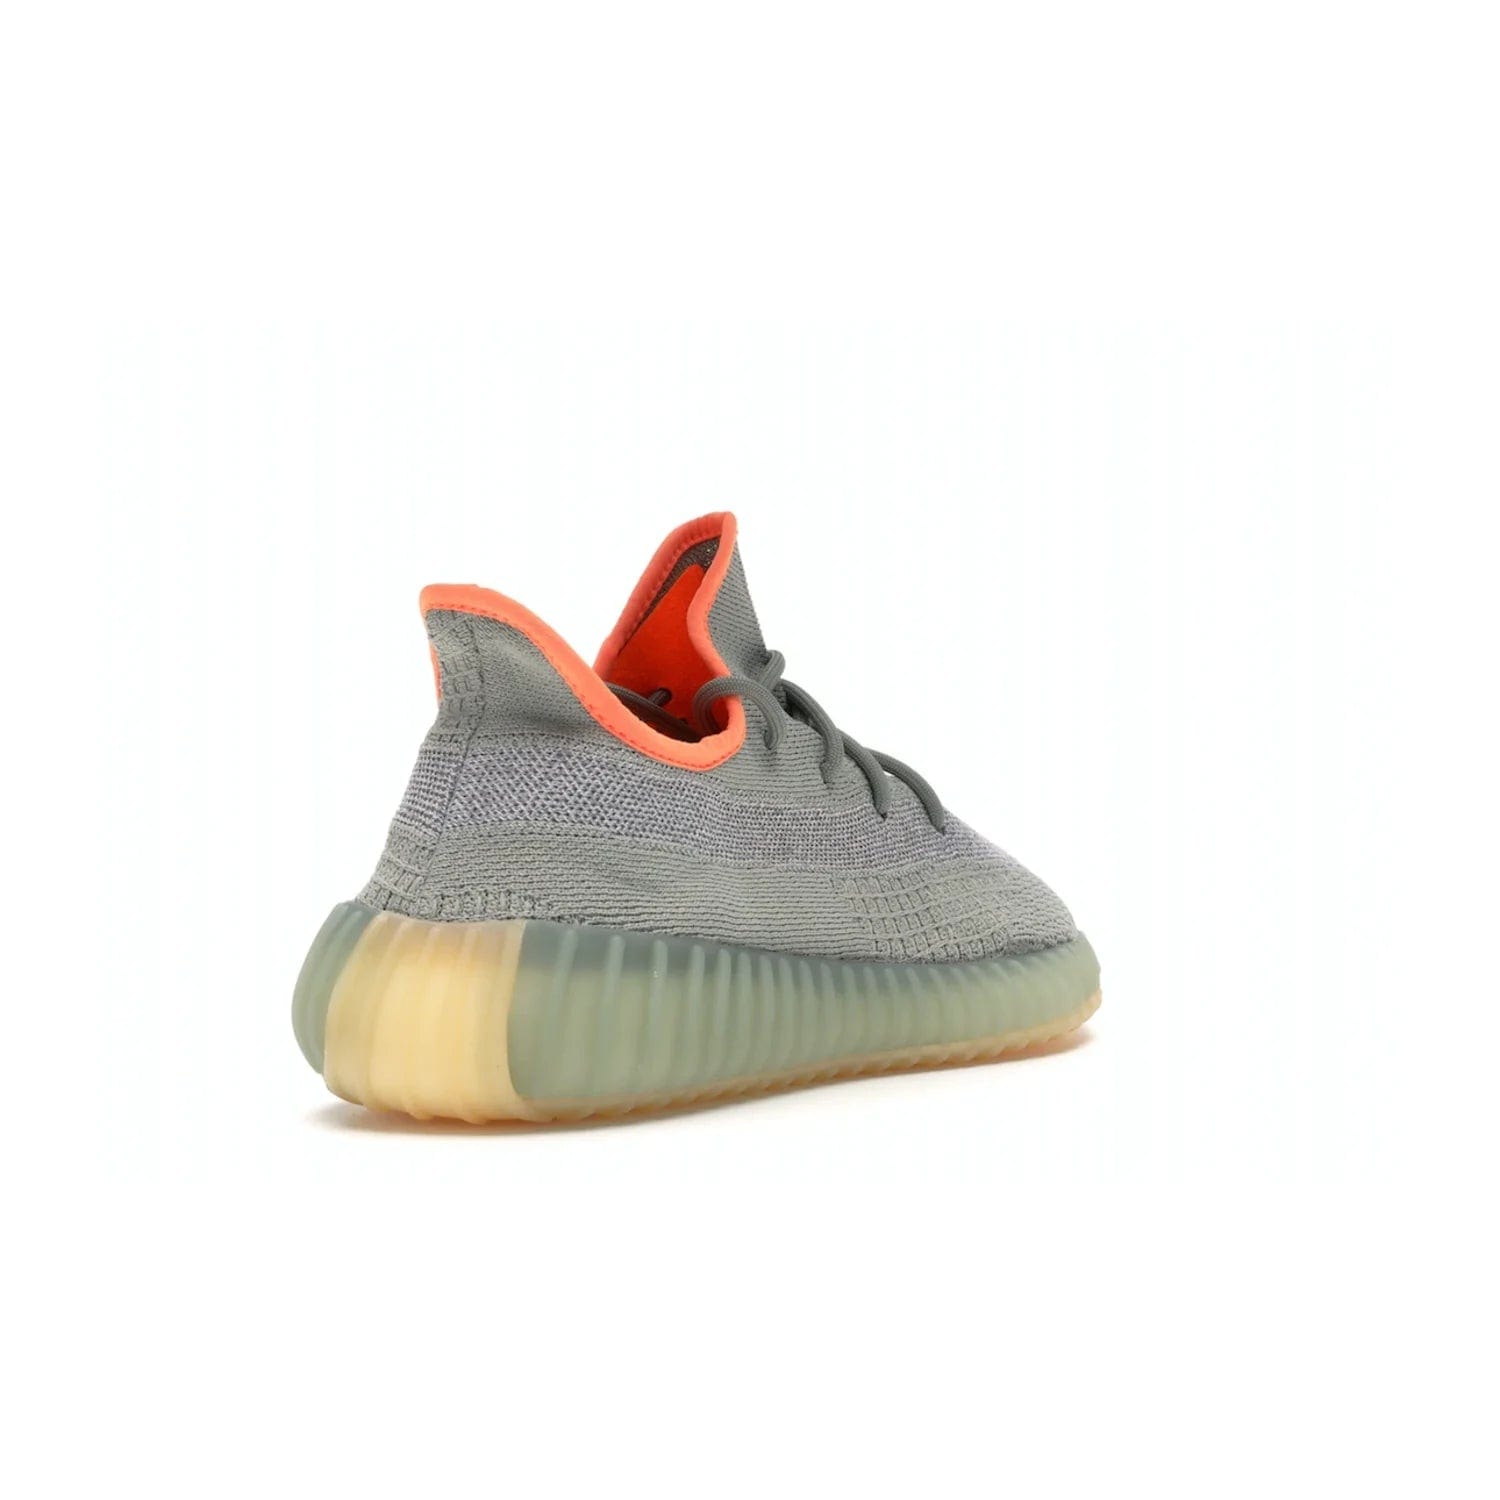 adidas Yeezy Boost 350 V2 Desert Sage - Image 31 - Only at www.BallersClubKickz.com - Upgrade your style with the adidas Yeezy Boost 350 V2 Desert Sage. This 350V2 features a Desert Sage primeknit upper with tonal side stripe, and an orange-highlighted translucent Boost cushioning sole. Stay on-trend in effortless style.